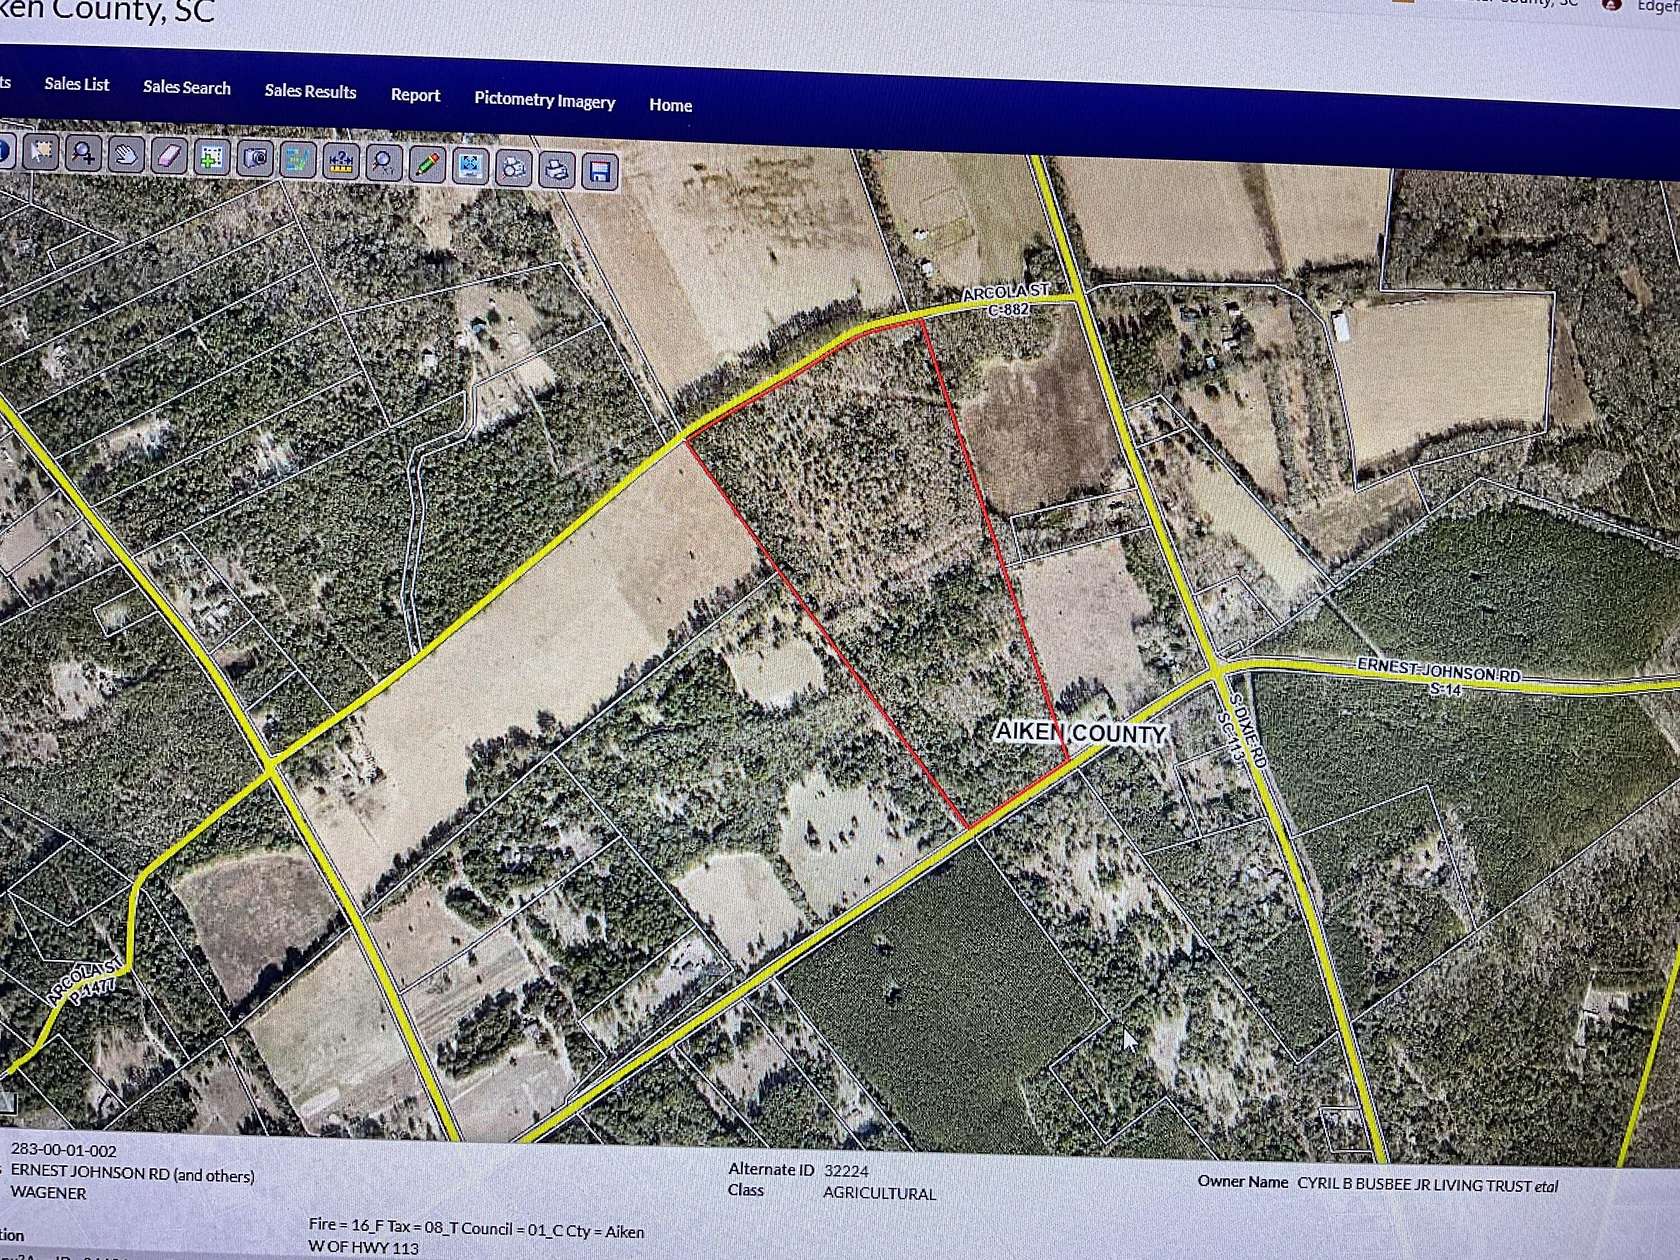 50.85 Acres of Land for Sale in Wagener, South Carolina